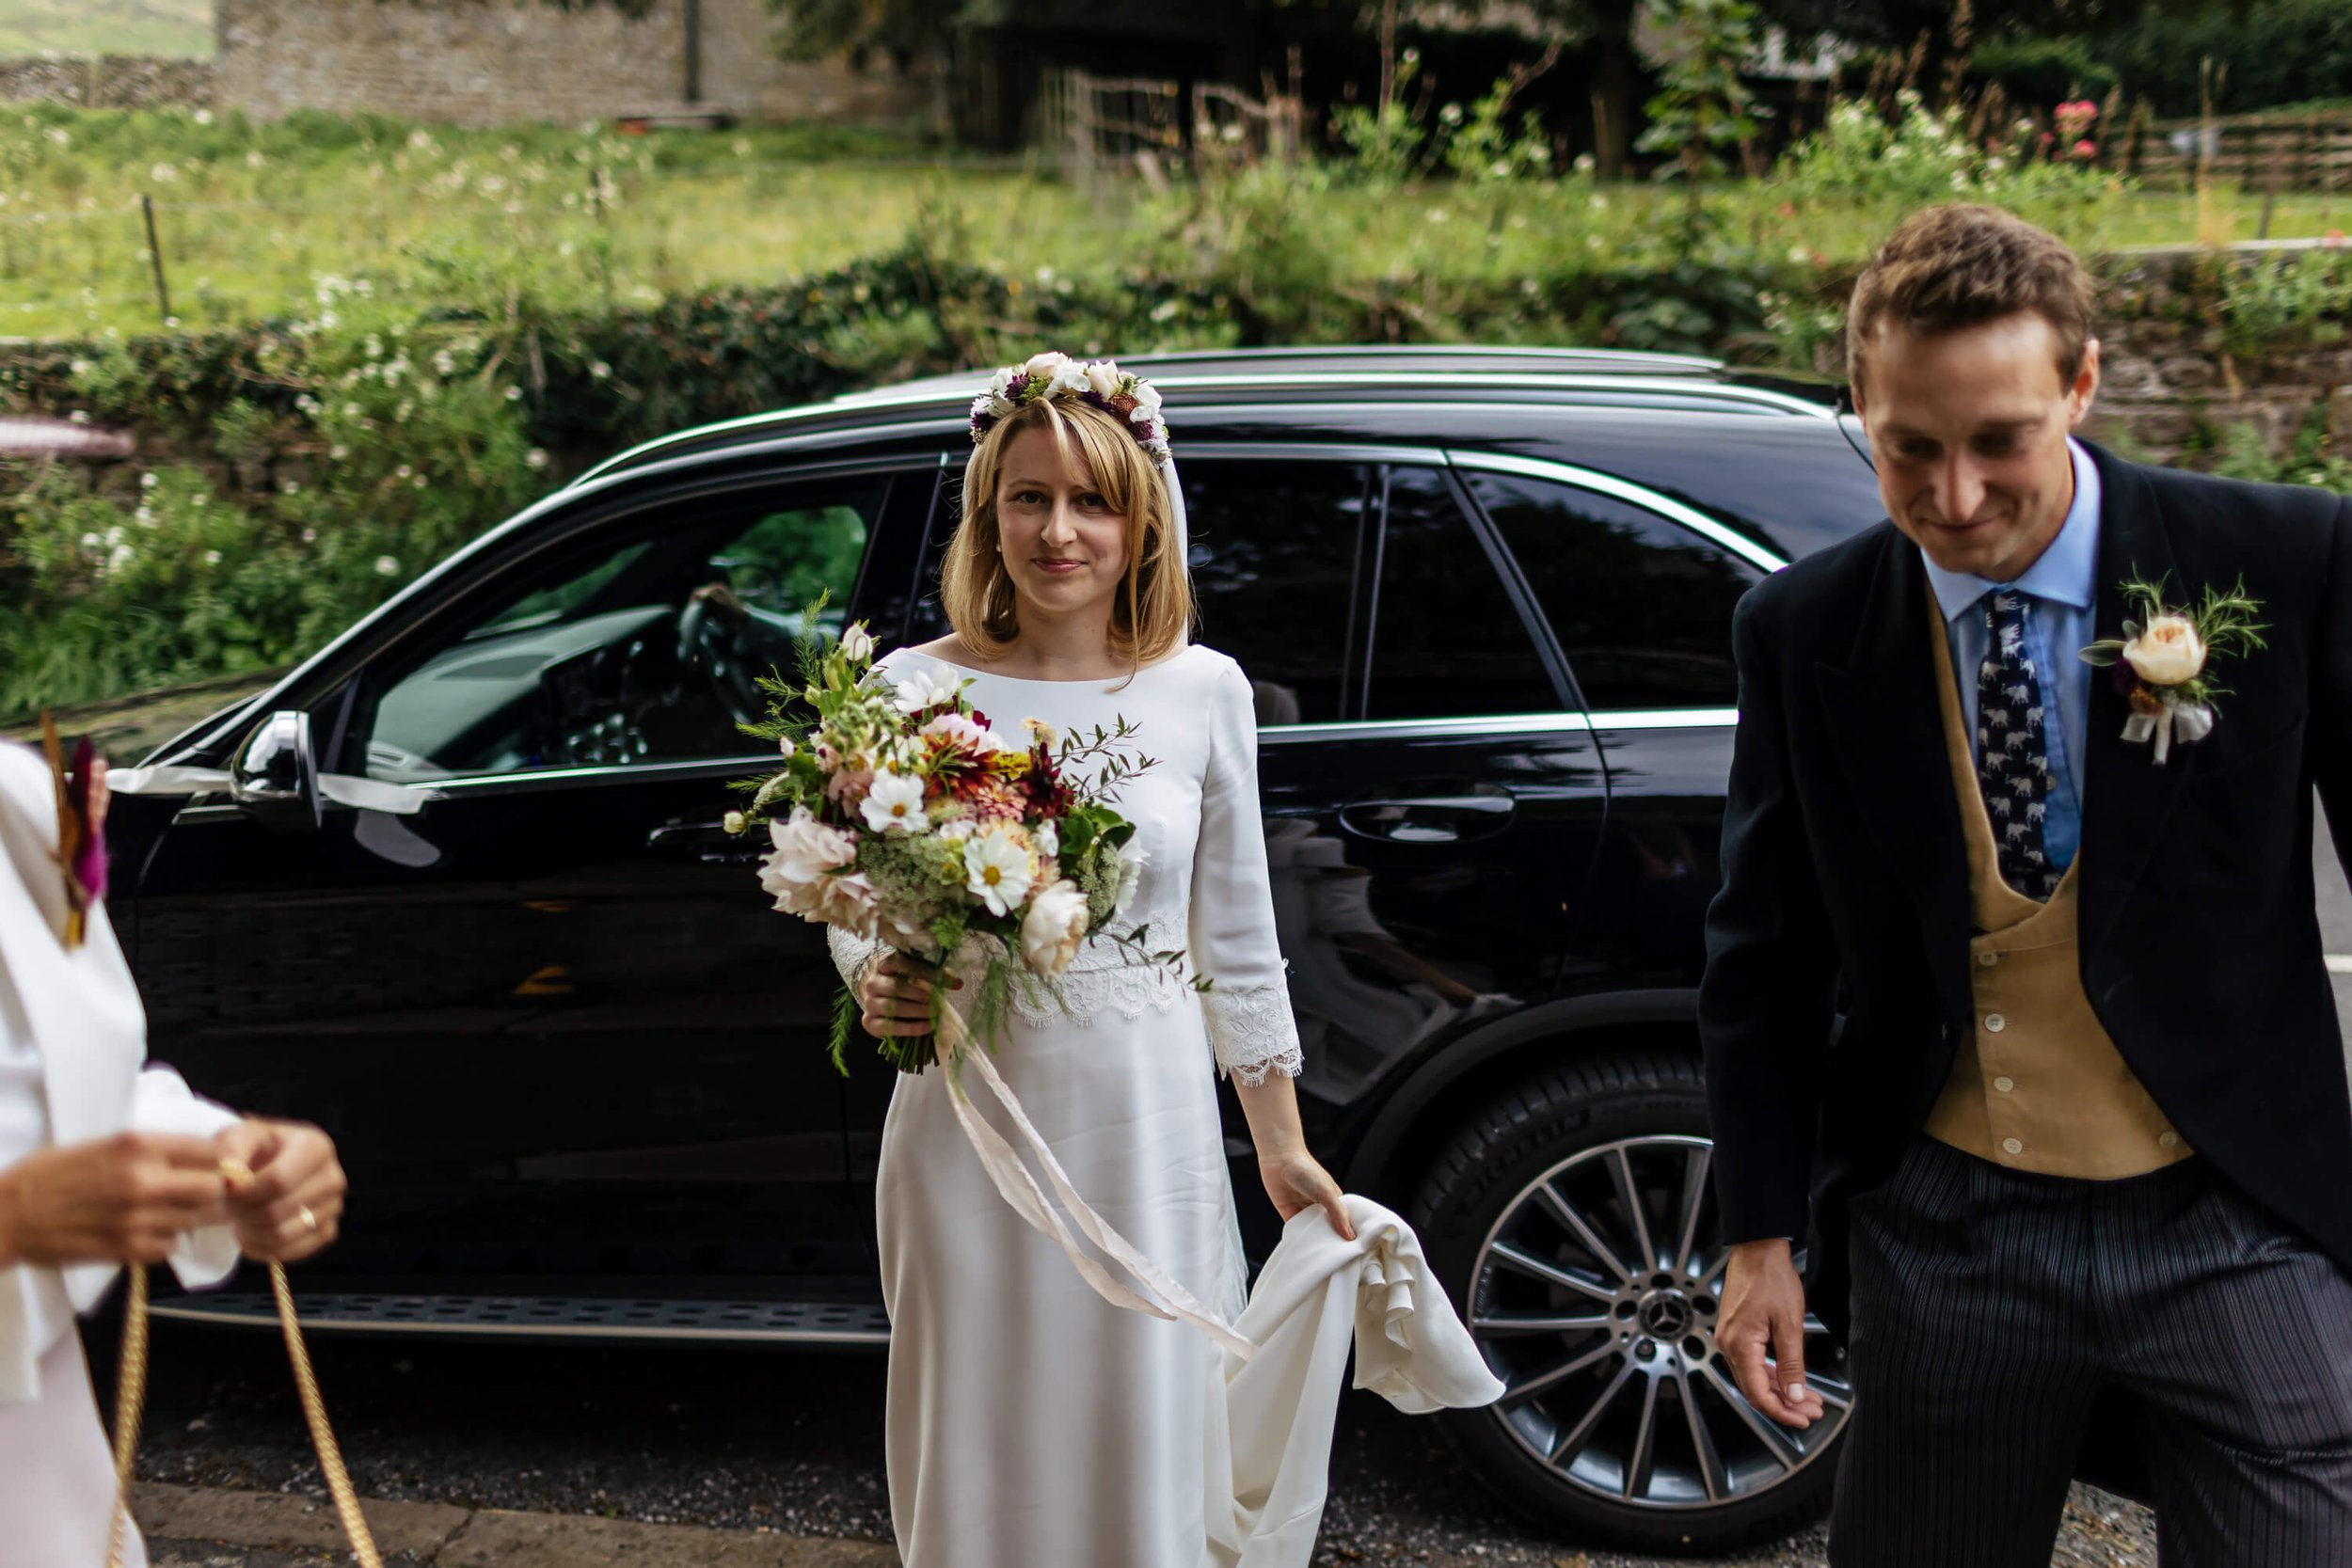 The bride arrives to her wedding in Yorkshire